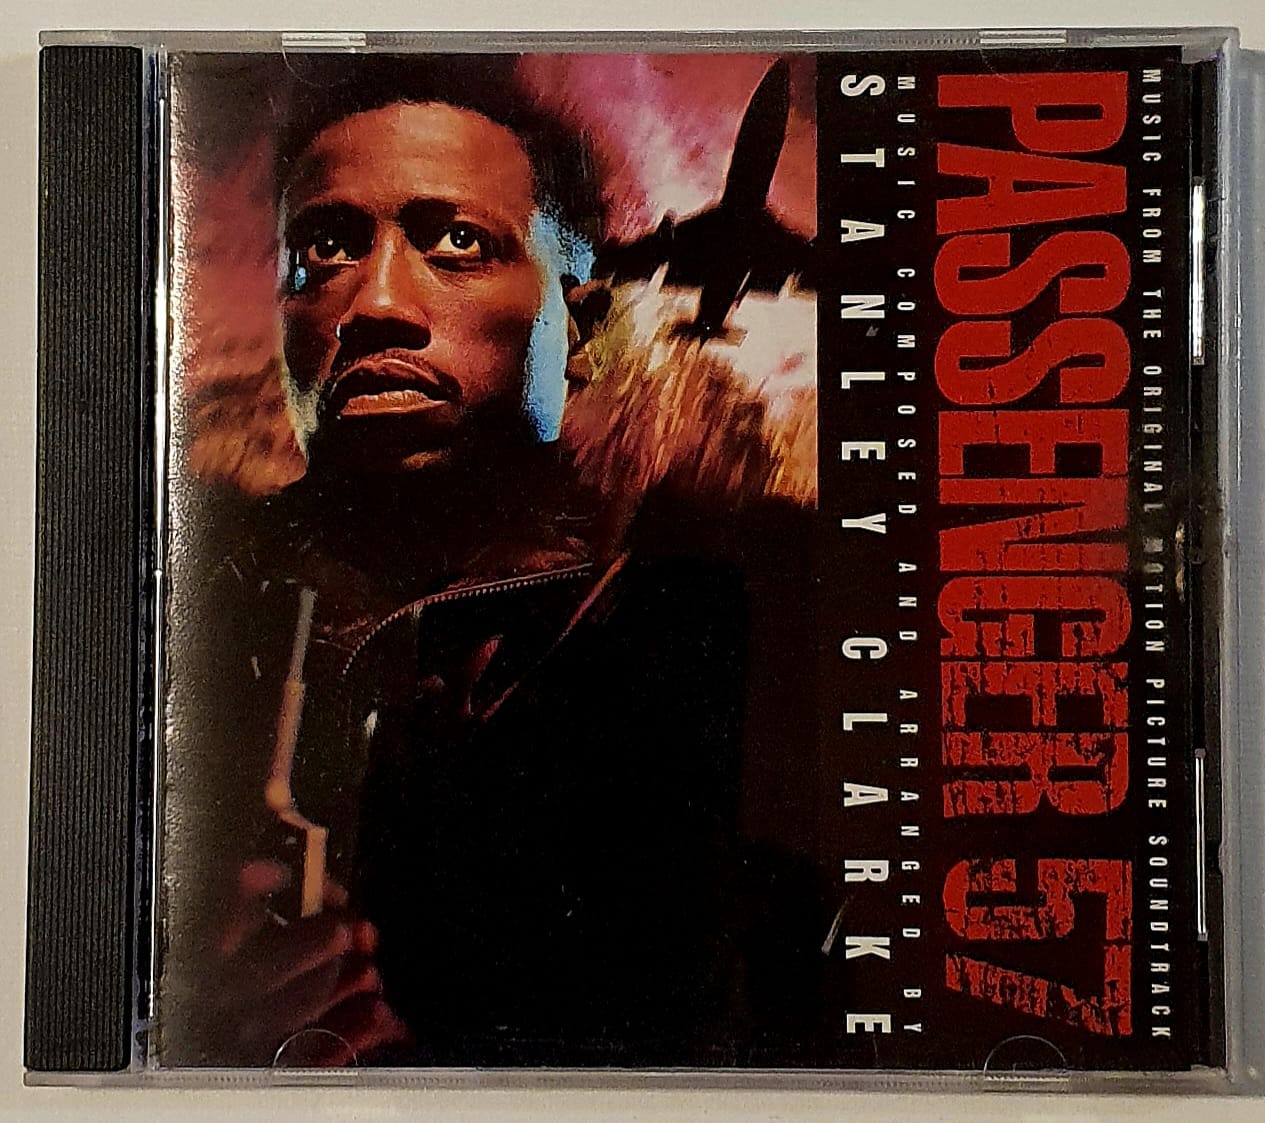 CD Passenger 57 (Music From The Original Motion Picture Soundtrack) (1992)